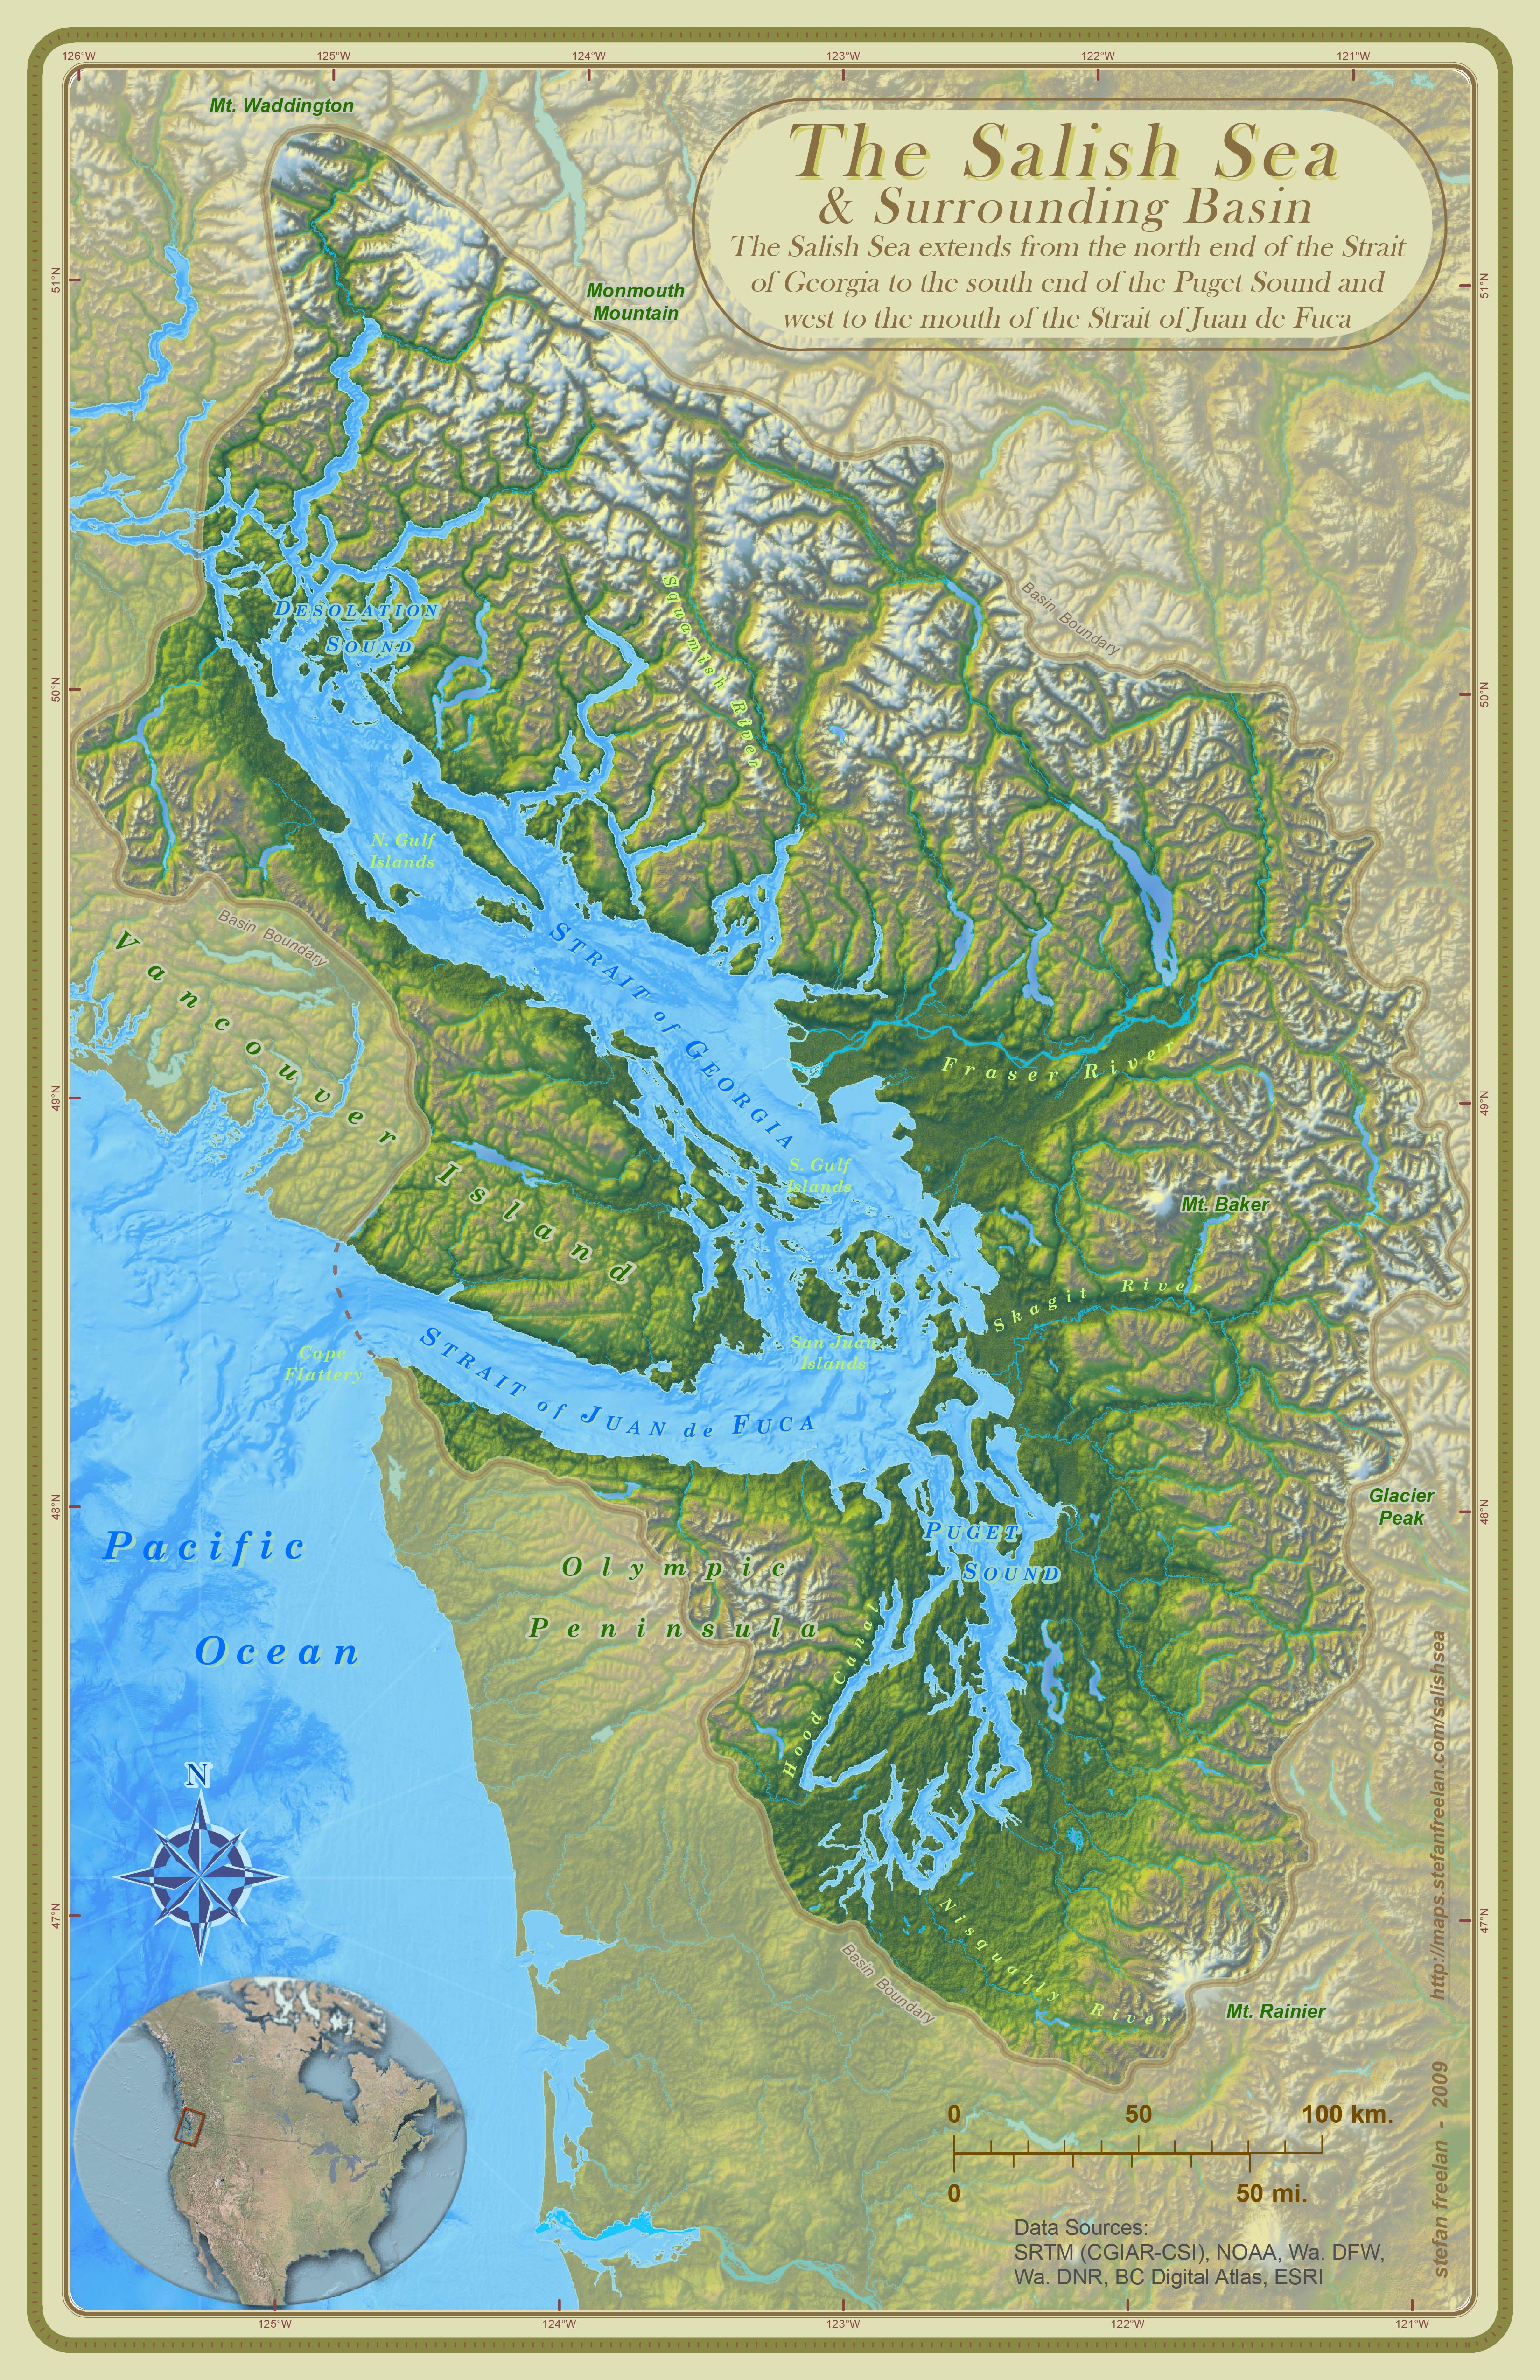 Map of the Salish Sea and Surrounding Basin. Designed by Spatial Institute Cartographer, Stefan Freelan